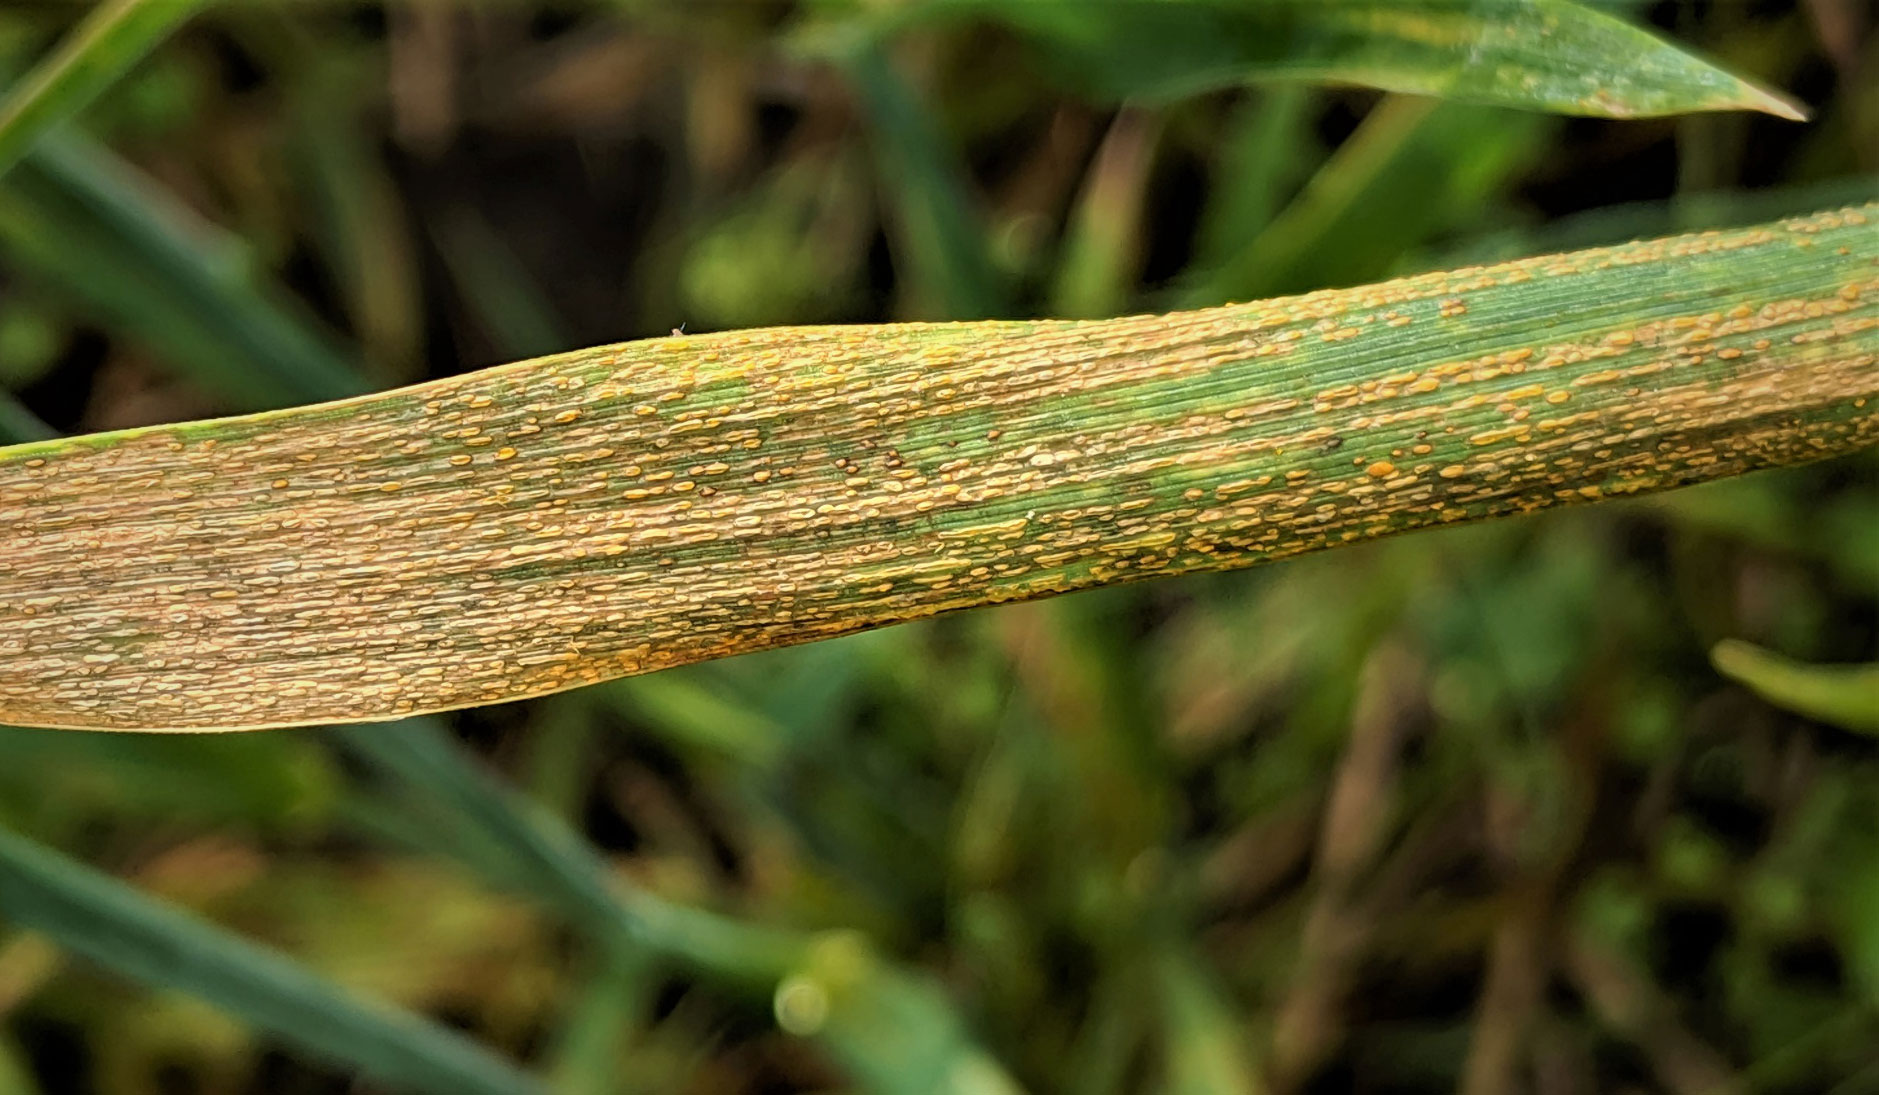 Wheat blade exhibiting brown, crusting strip rust pustules running laterally throughout the blade.